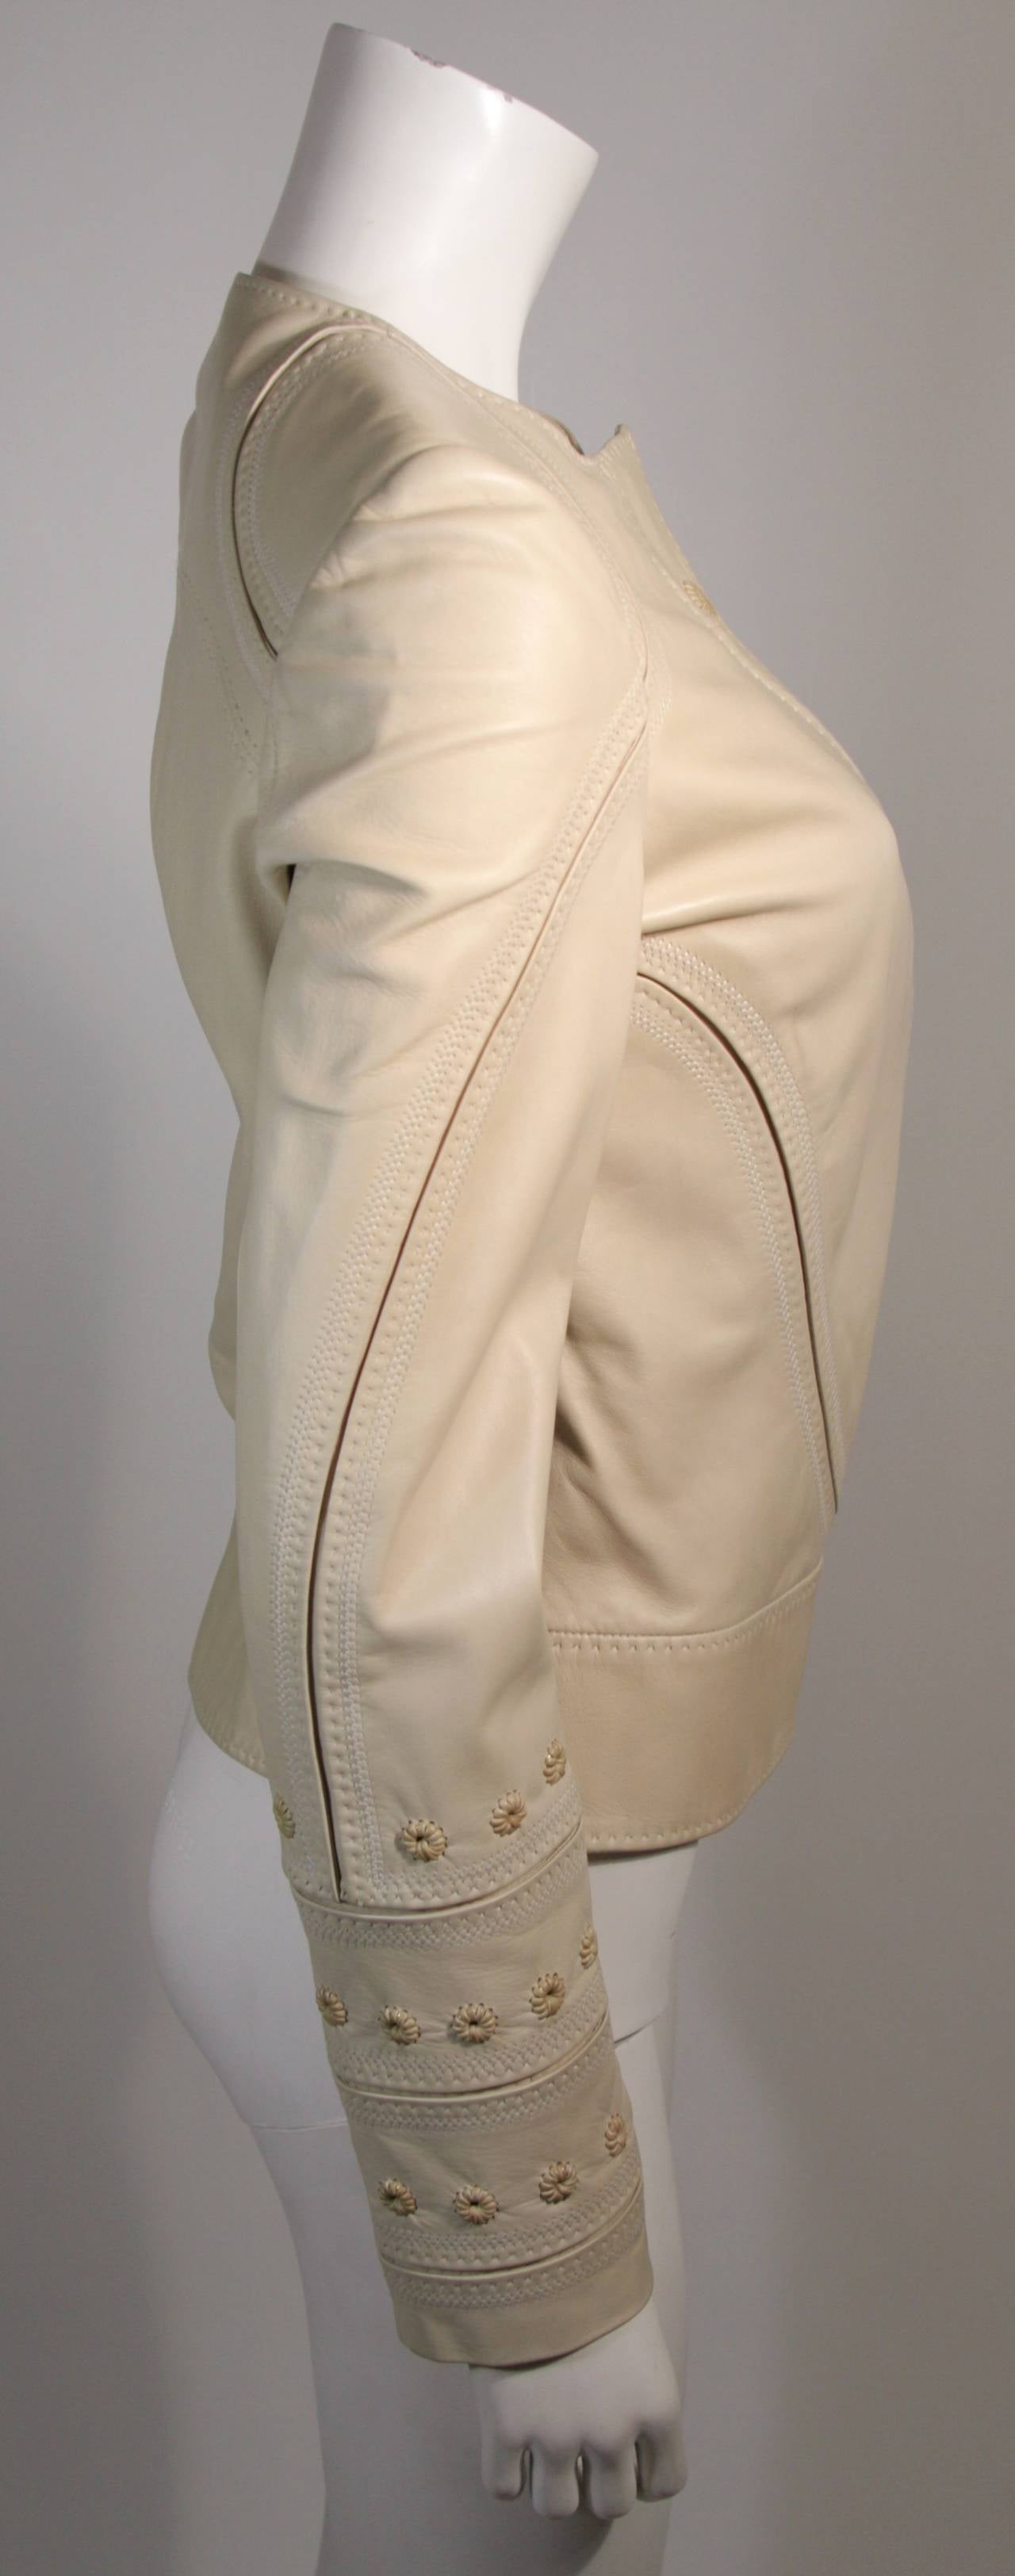 Brown Gucci Nude Leather Moto Style Jacket